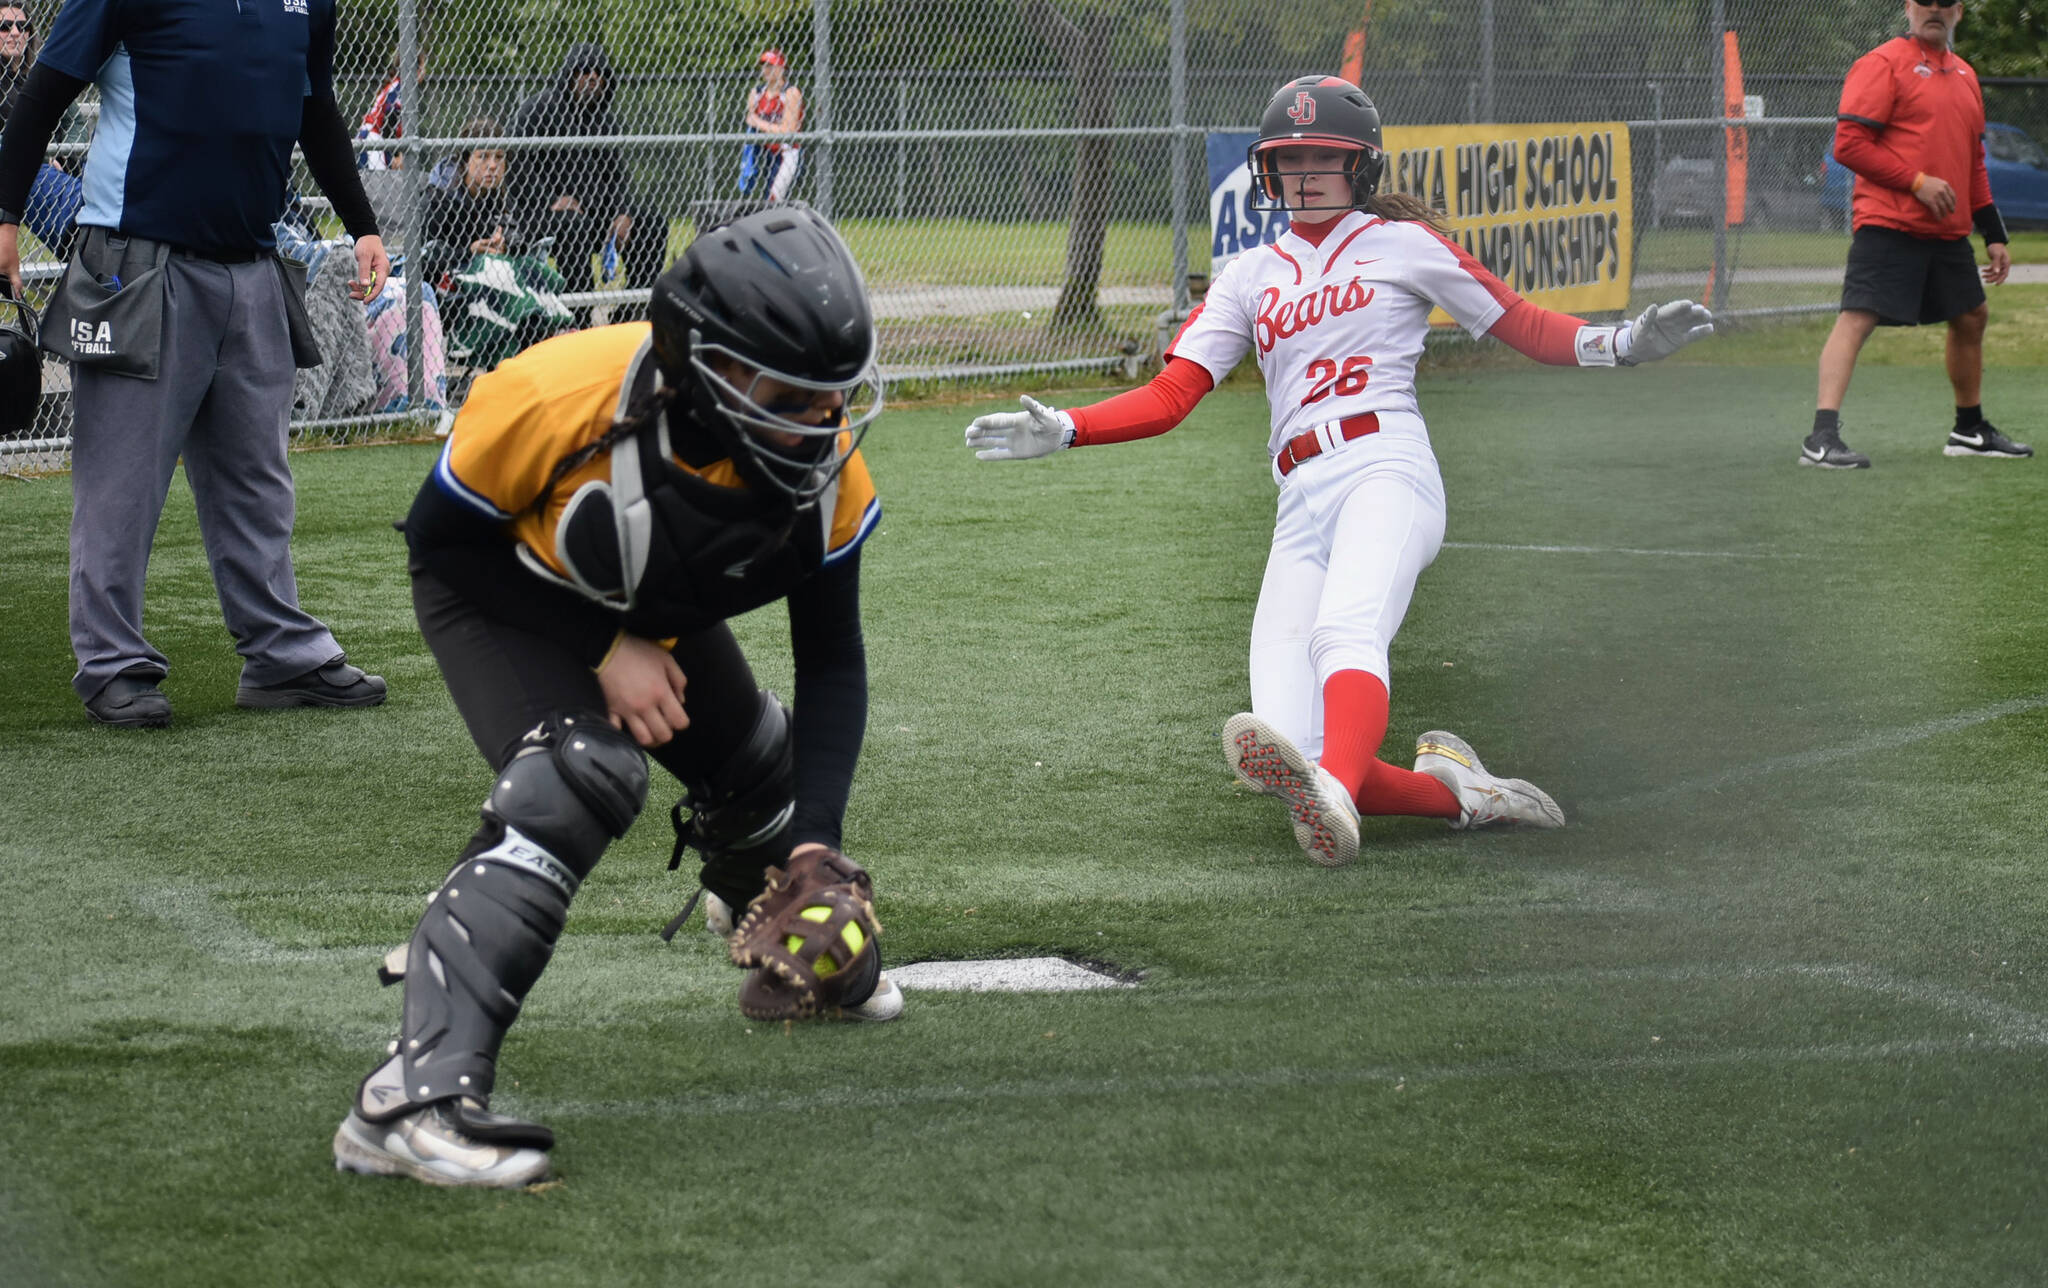 JDHS freshman Gwen Nizich slides into home plate against Kodiak during the Crimson Bears 9-1 win over the Bears on Thursday in the ASAA Division II State Softball Tournament at Anchorage’s Cartee Fields. (Photo Courtesy JDHS Softball)